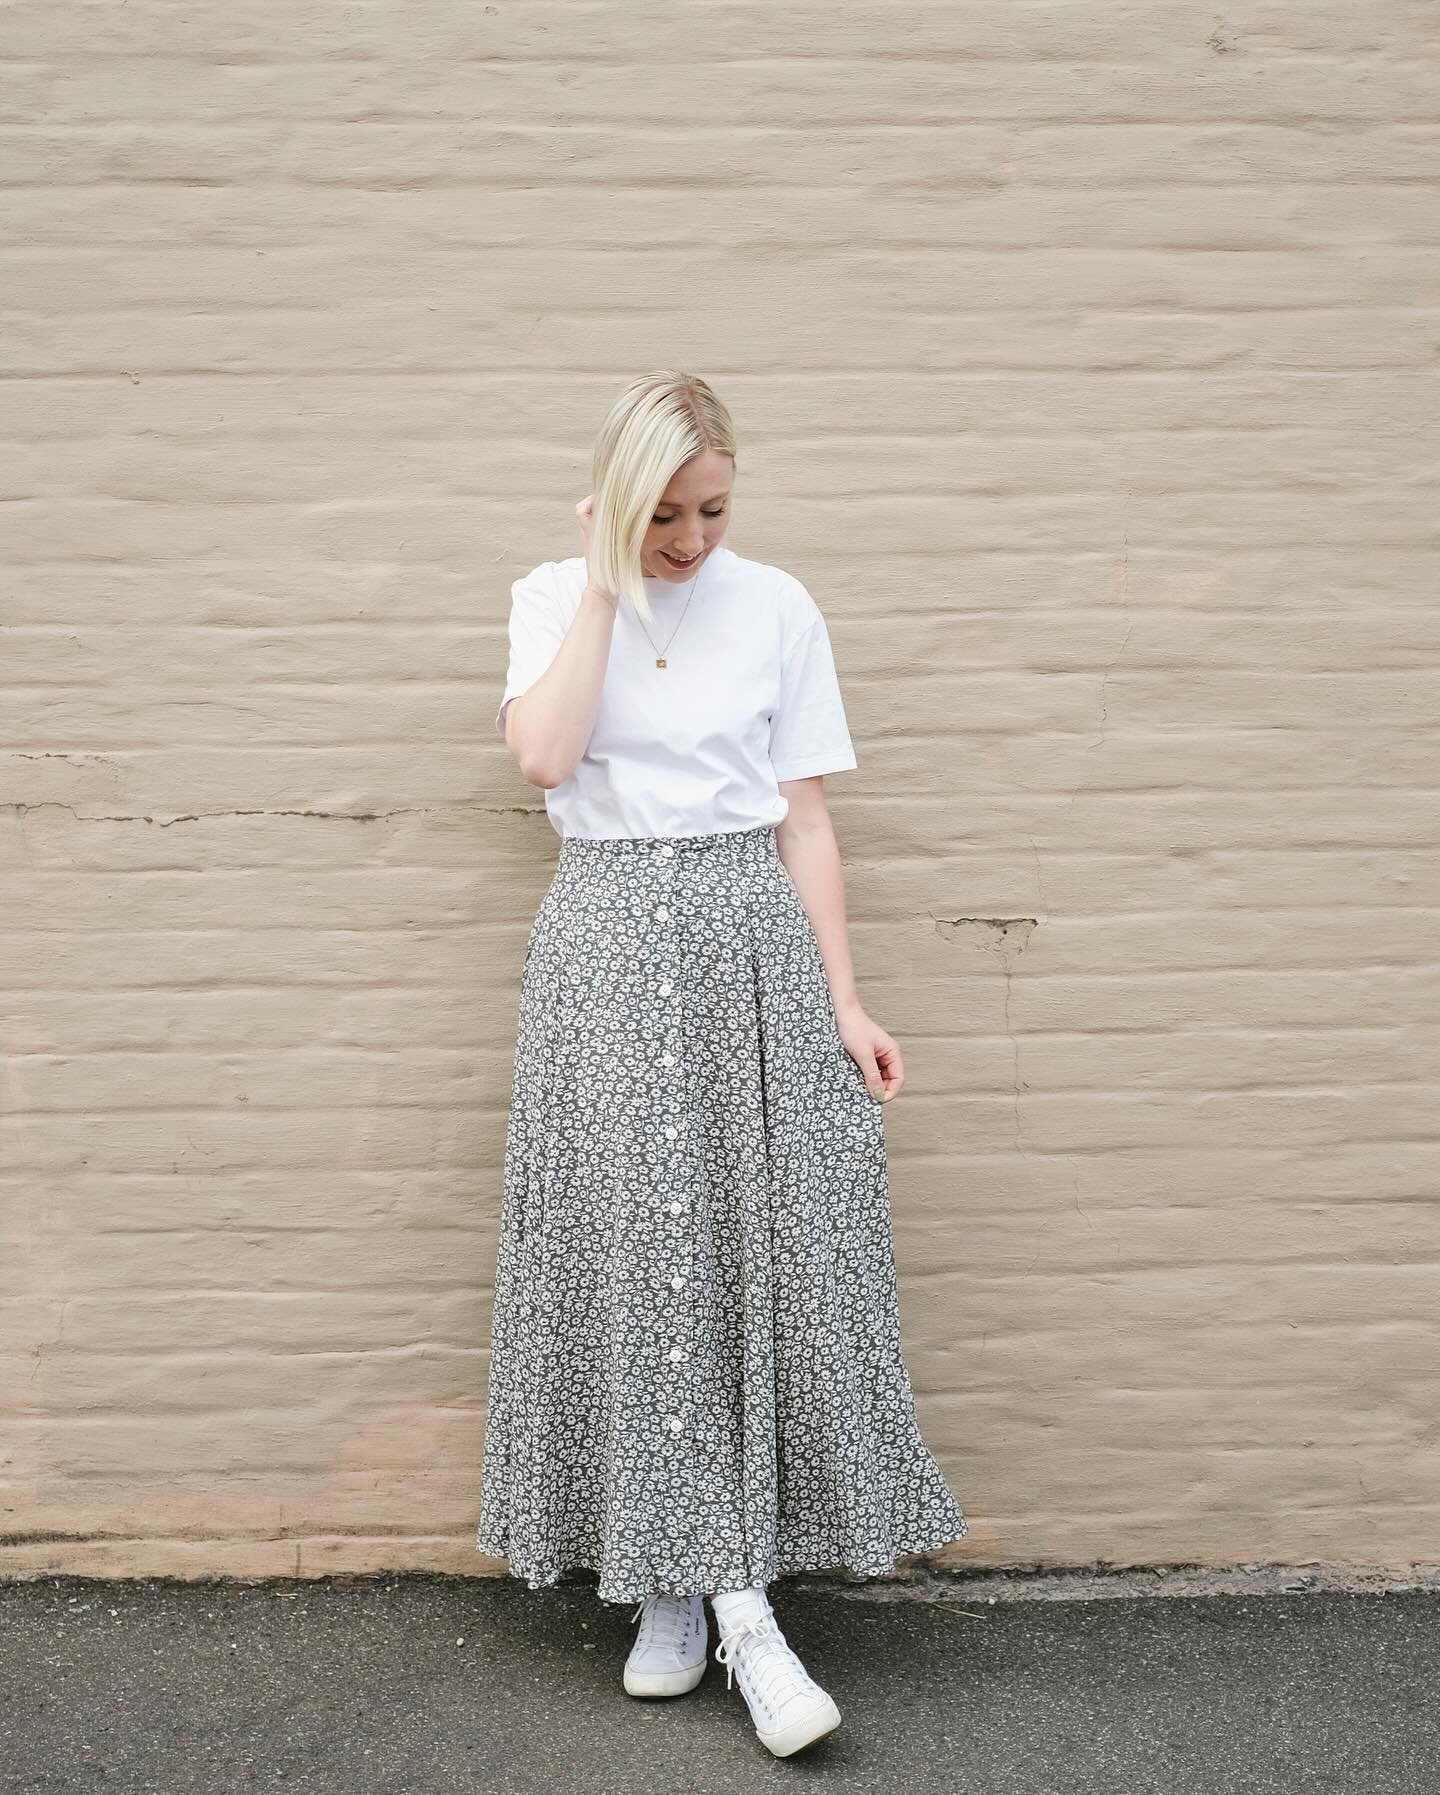 ✨The Clover skirt✨ Pattern available April 28!

I&rsquo;m so excited to finally be sharing the pattern for this dreamy, 90s style skirt with you this weekend!!

A little bit about the Clover pattern&hellip;

+ Two length options to choose from - extr